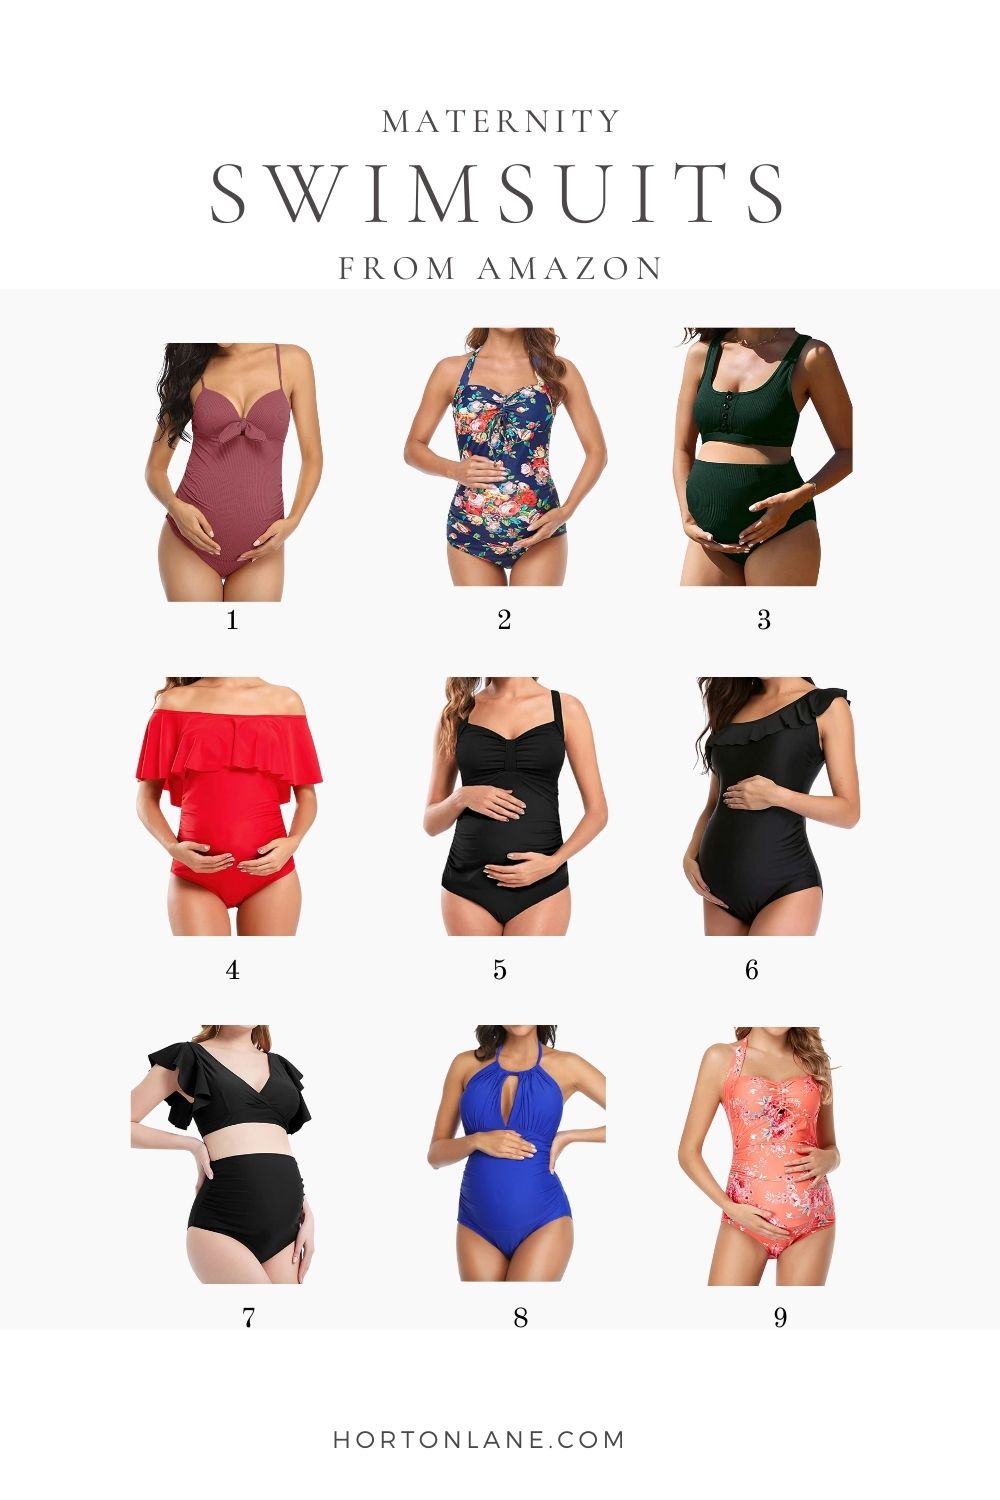 Collages Maternity Swimsuits from Amazon